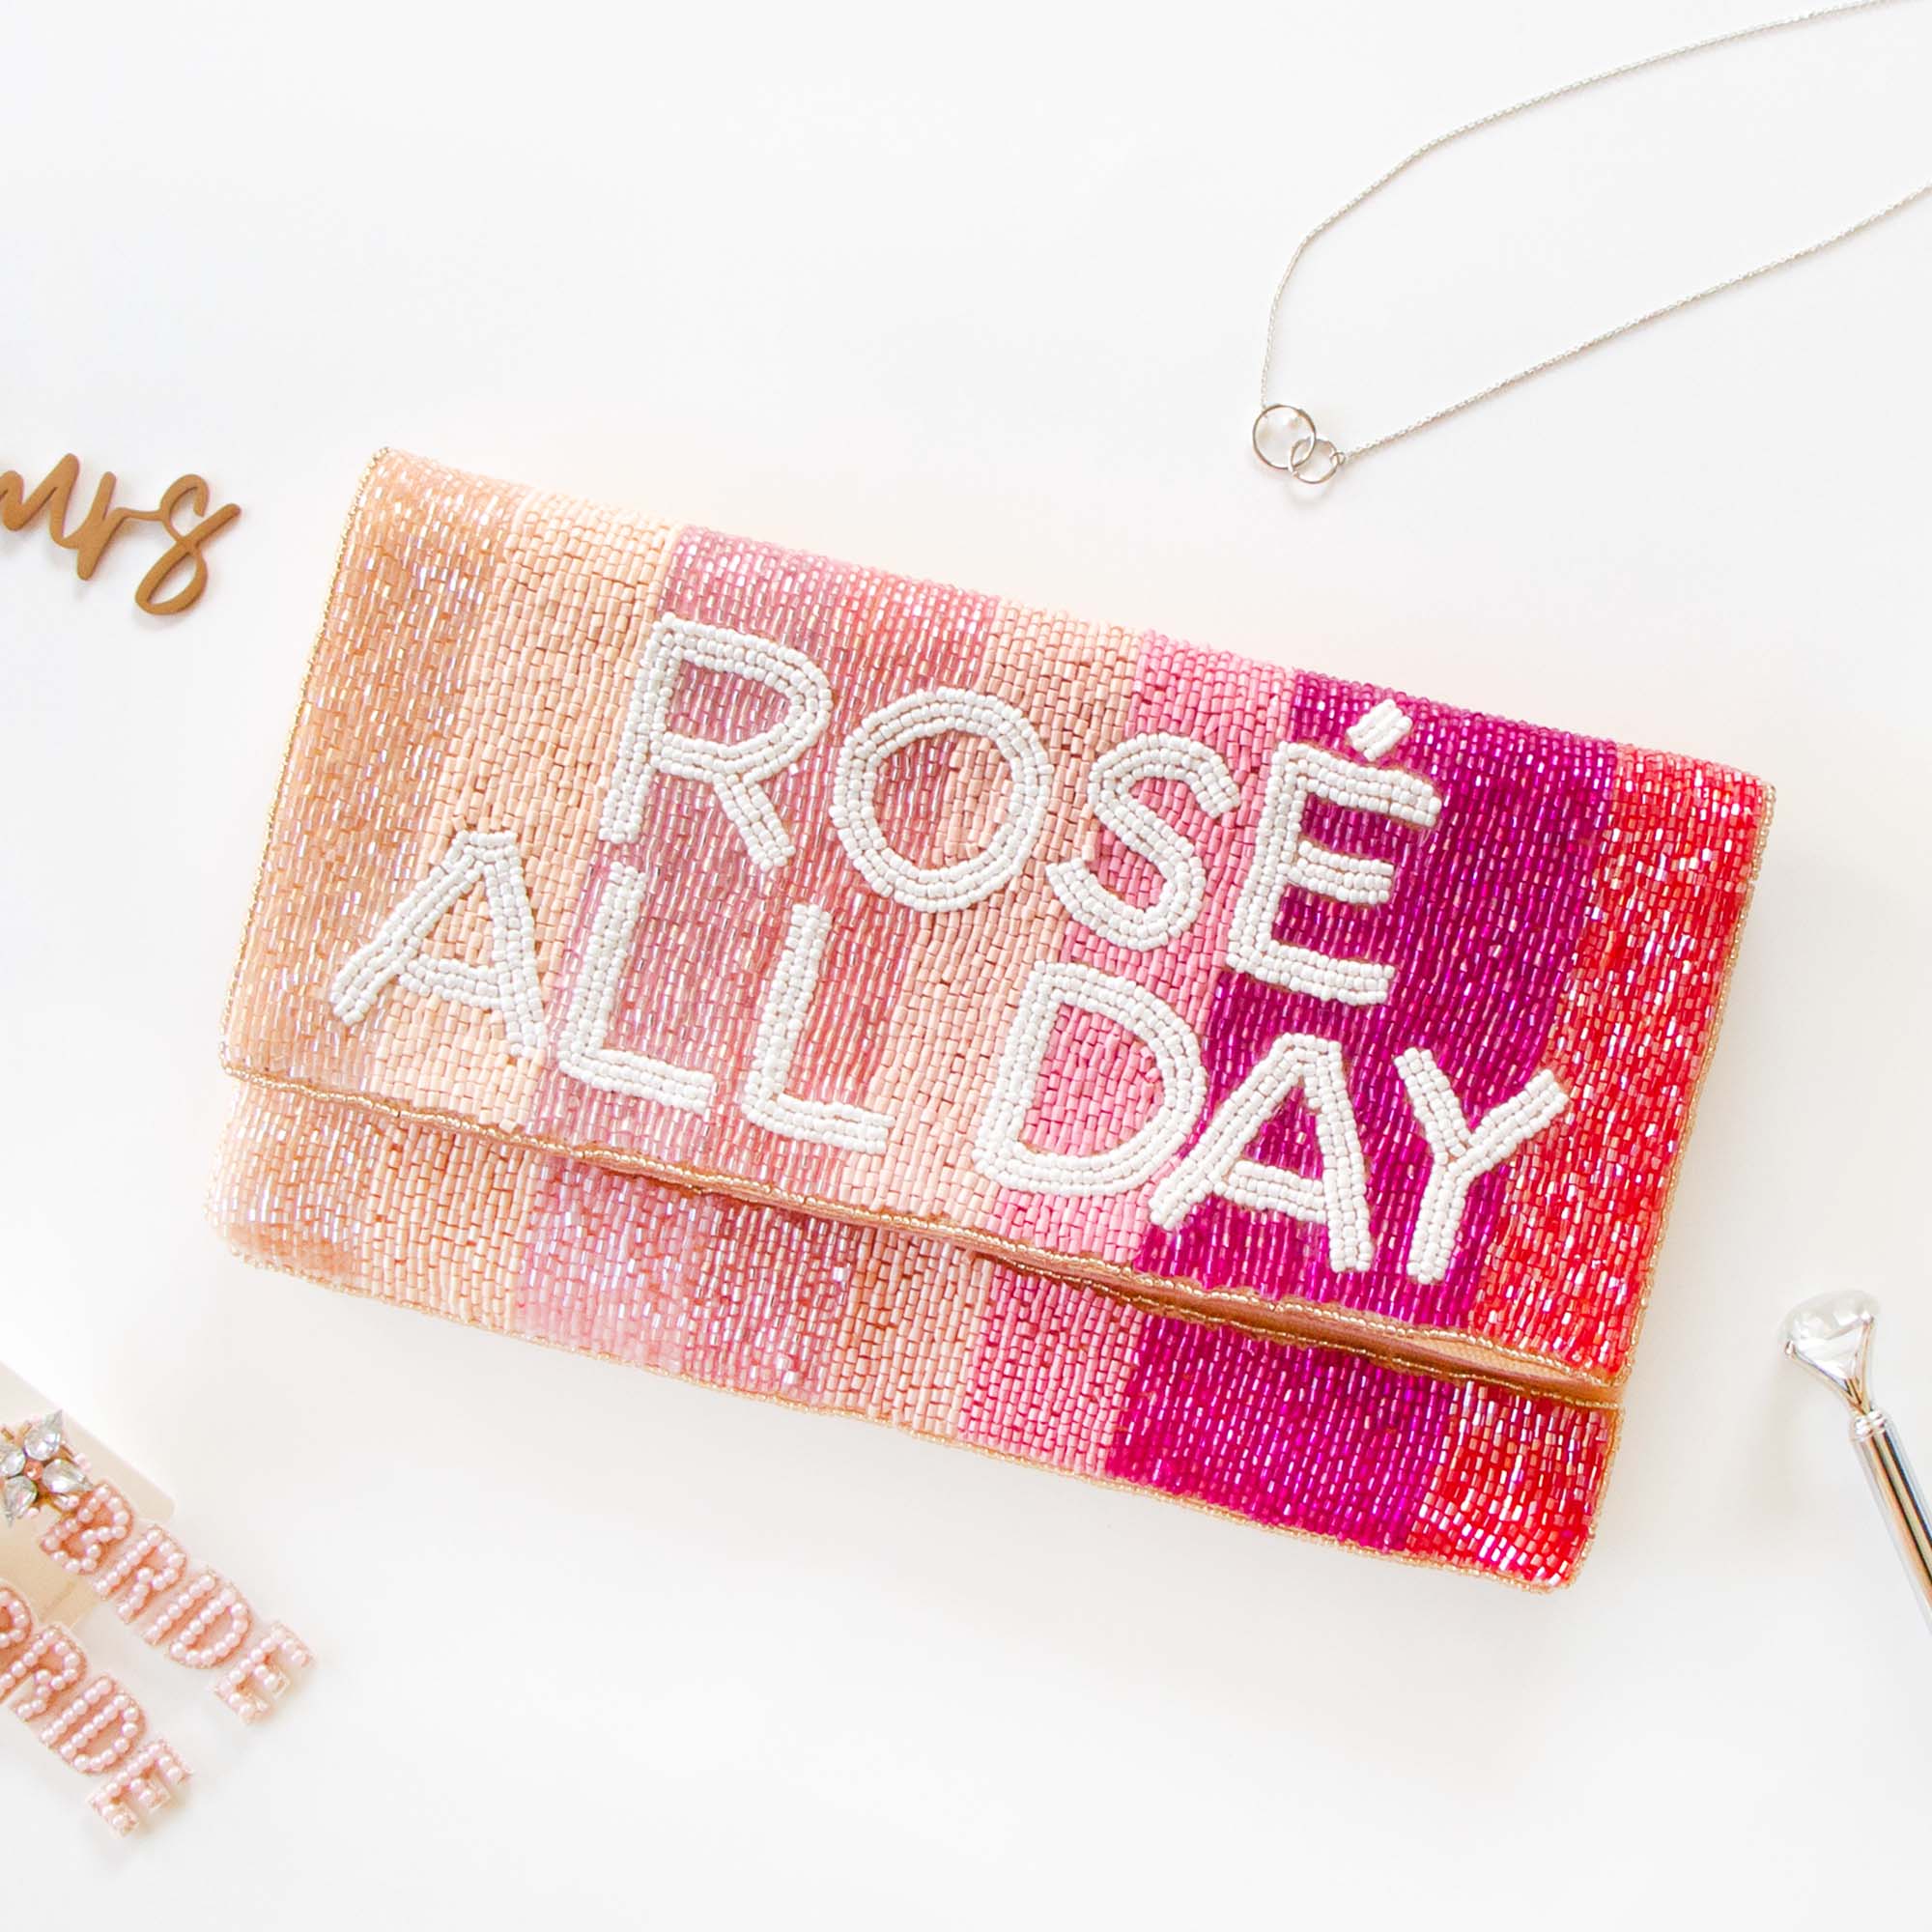 Rose All Day Clutch Bag